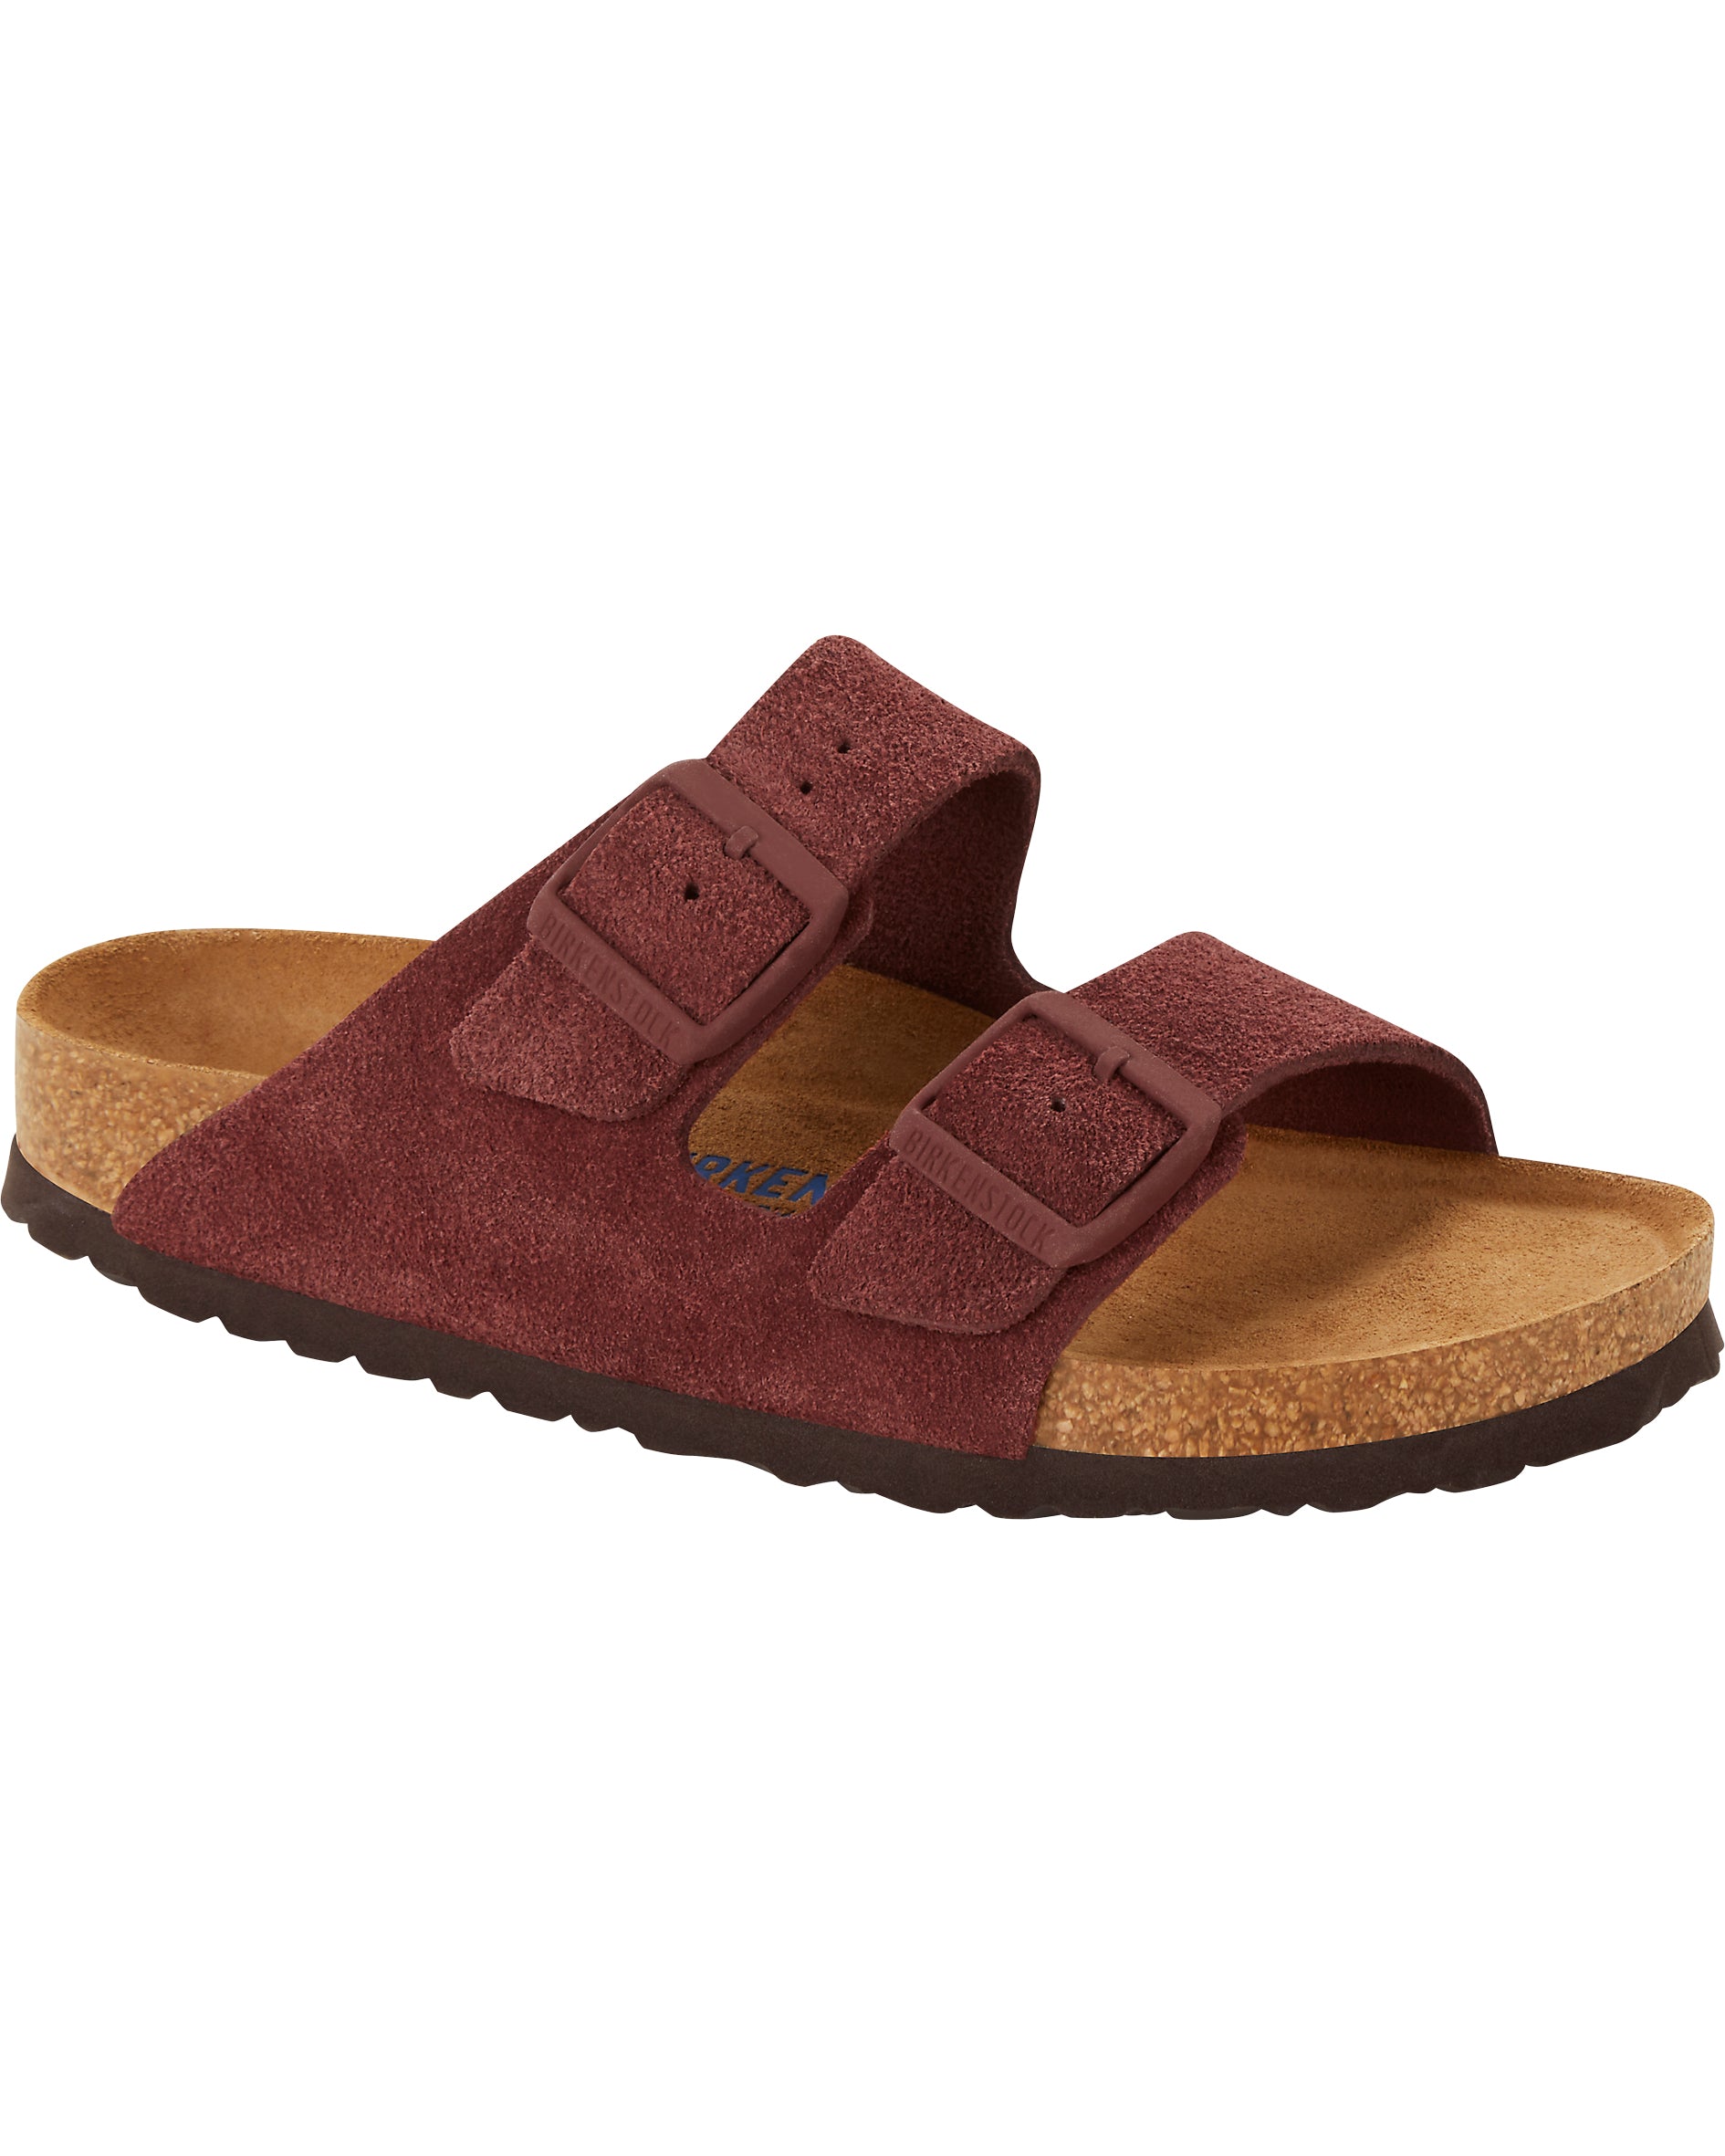 Arizona Soft Footbed Chocolate Suede Leather Sandals